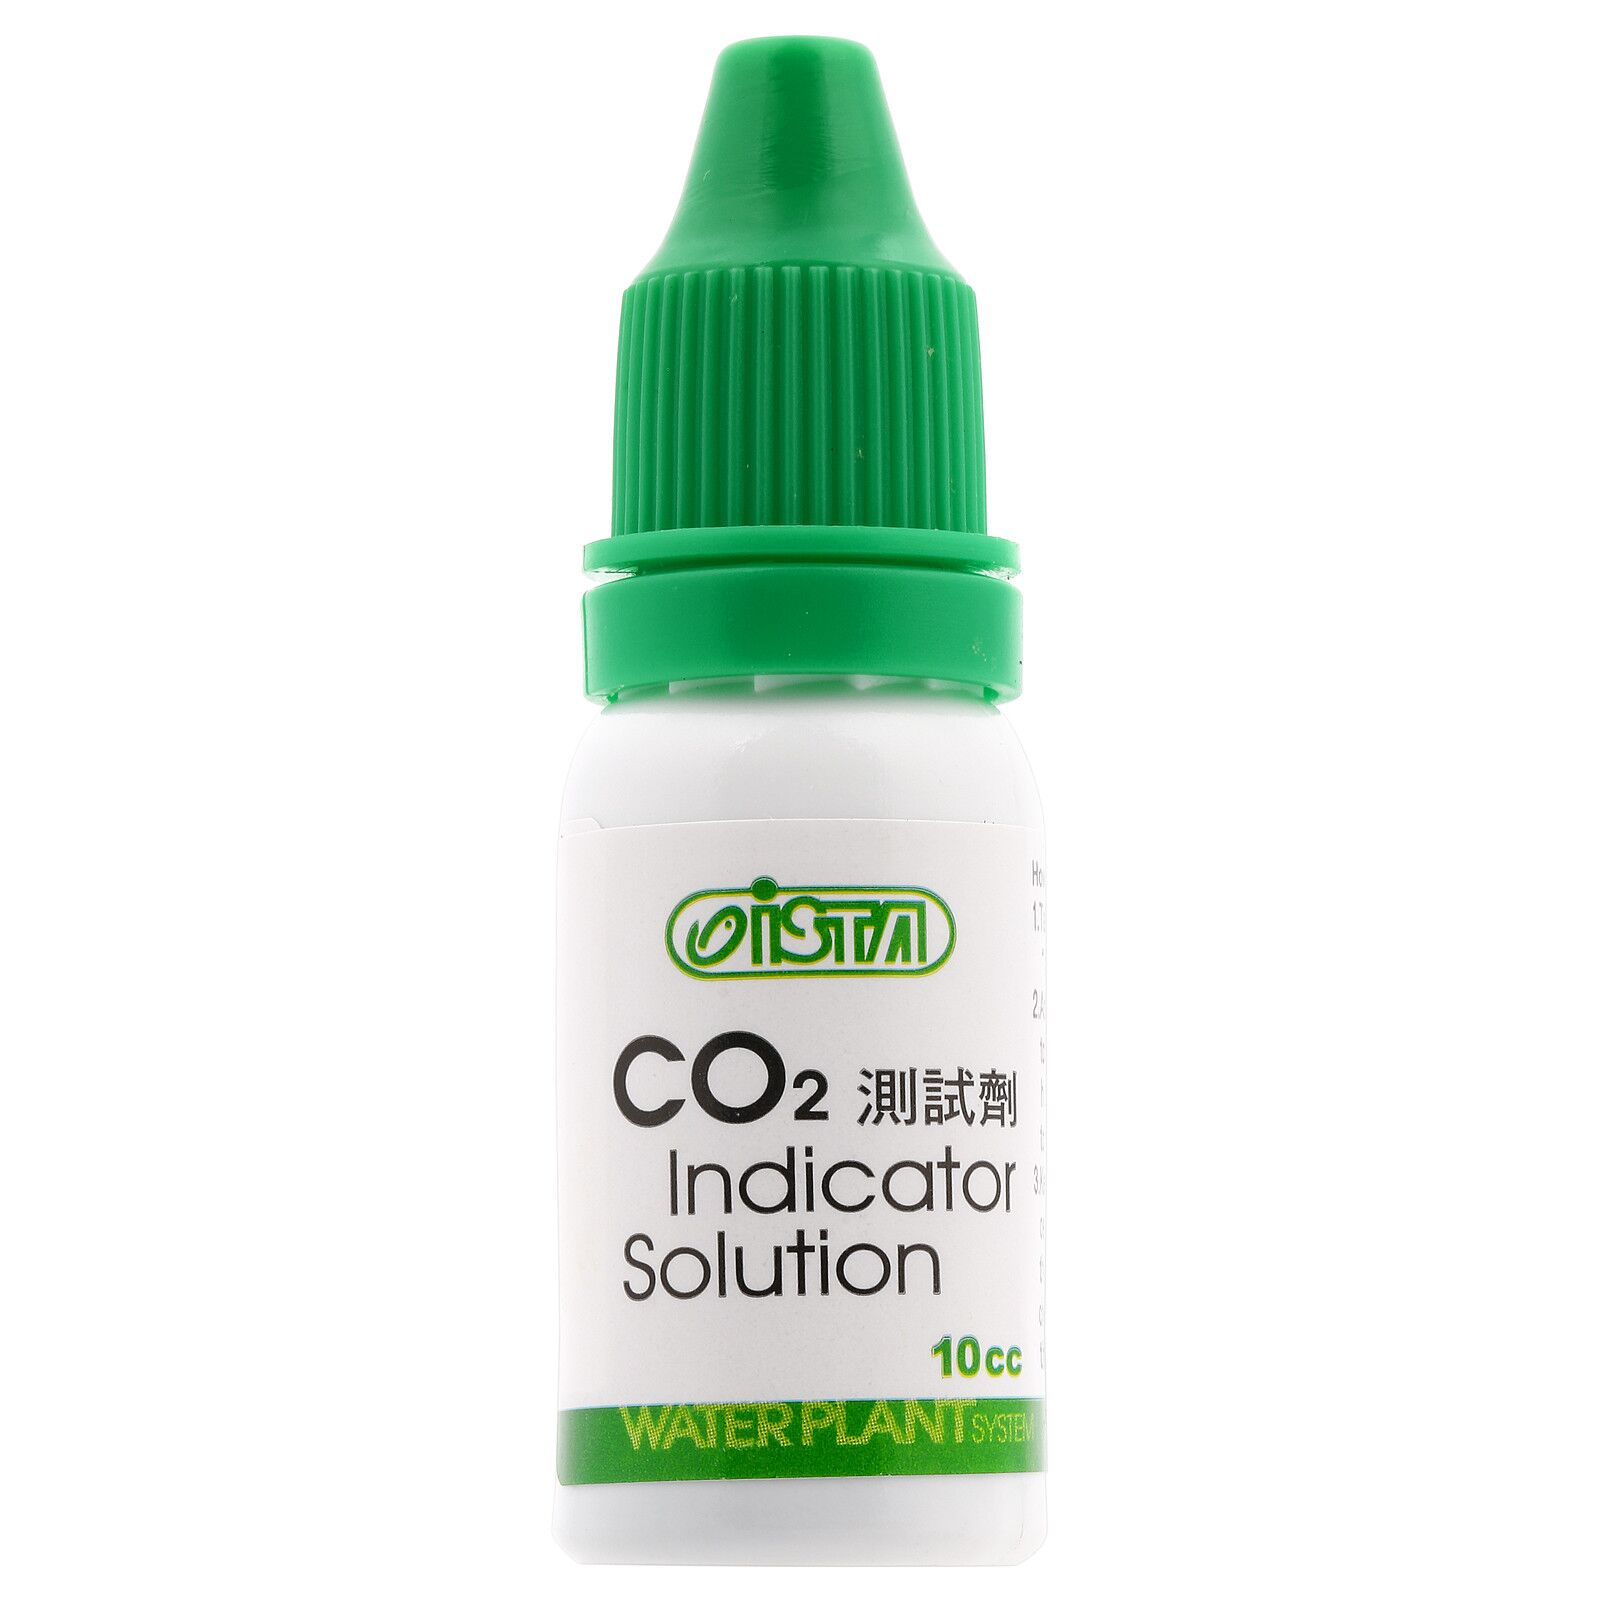 ISTA - CO2 Indicator Solution